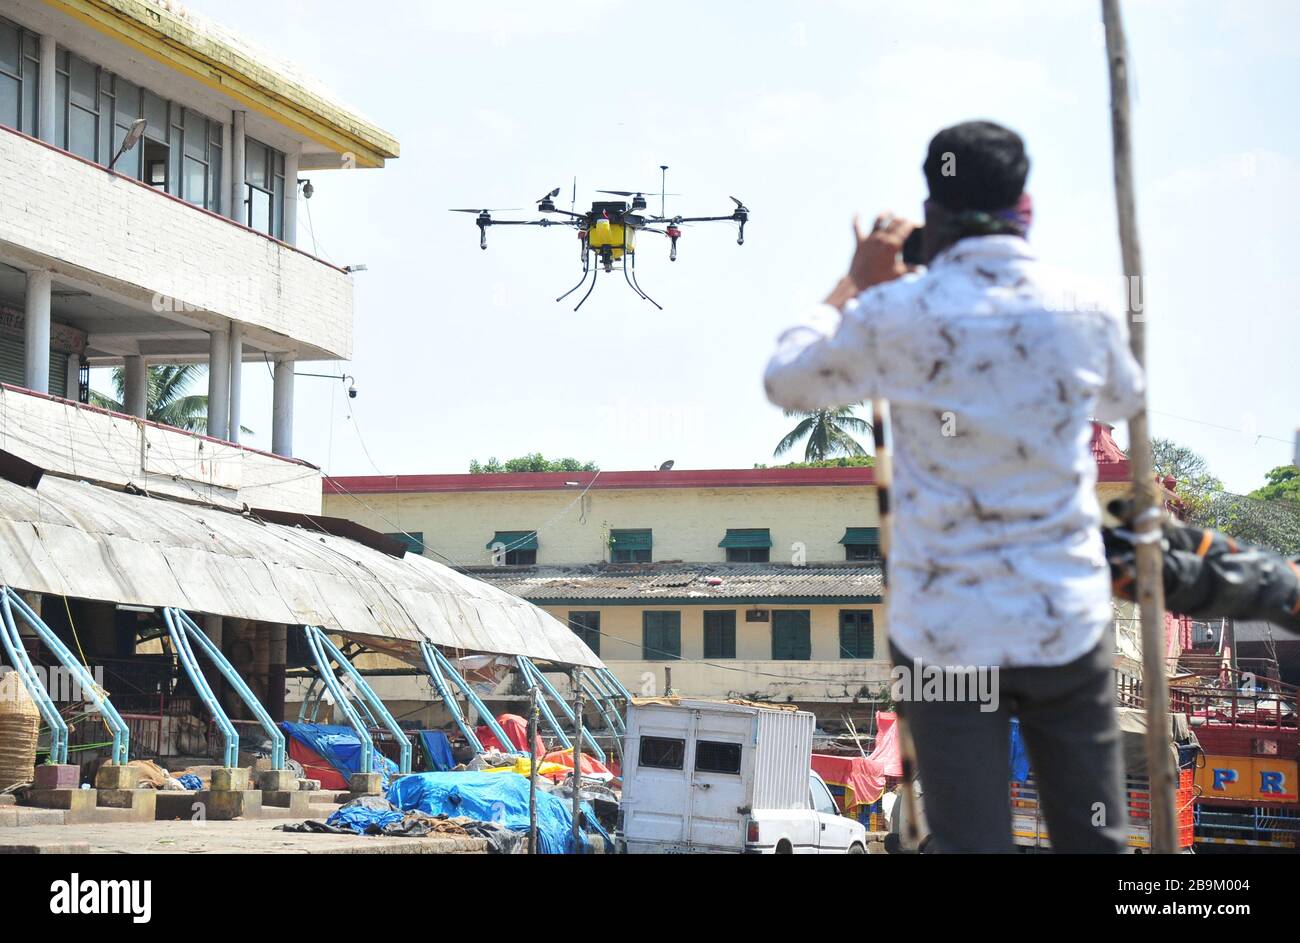 Bangalore, India. 24th Mar, 2020. Indian private company workers fly a drone to spray disinfectant in Bangalore, India, March 24, 2020. The number of confirmed COVID-19 cases in India has reached 519, India's federal health ministry said Tuesday evening. Credit: Str/Xinhua/Alamy Live News Stock Photo